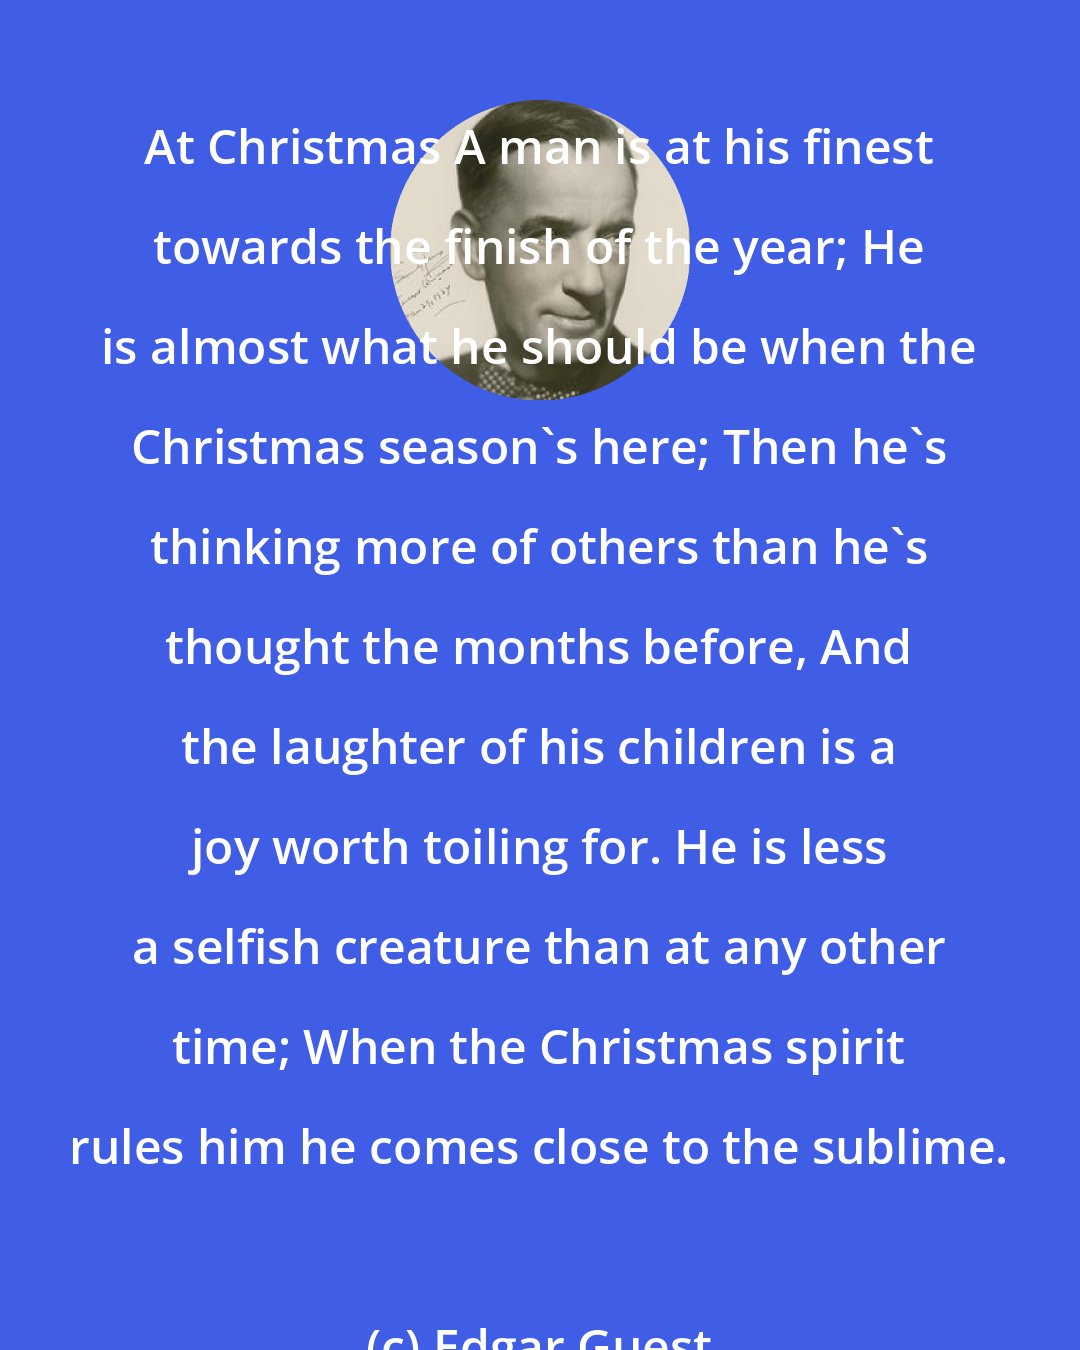 Edgar Guest: At Christmas A man is at his finest towards the finish of the year; He is almost what he should be when the Christmas season's here; Then he's thinking more of others than he's thought the months before, And the laughter of his children is a joy worth toiling for. He is less a selfish creature than at any other time; When the Christmas spirit rules him he comes close to the sublime.